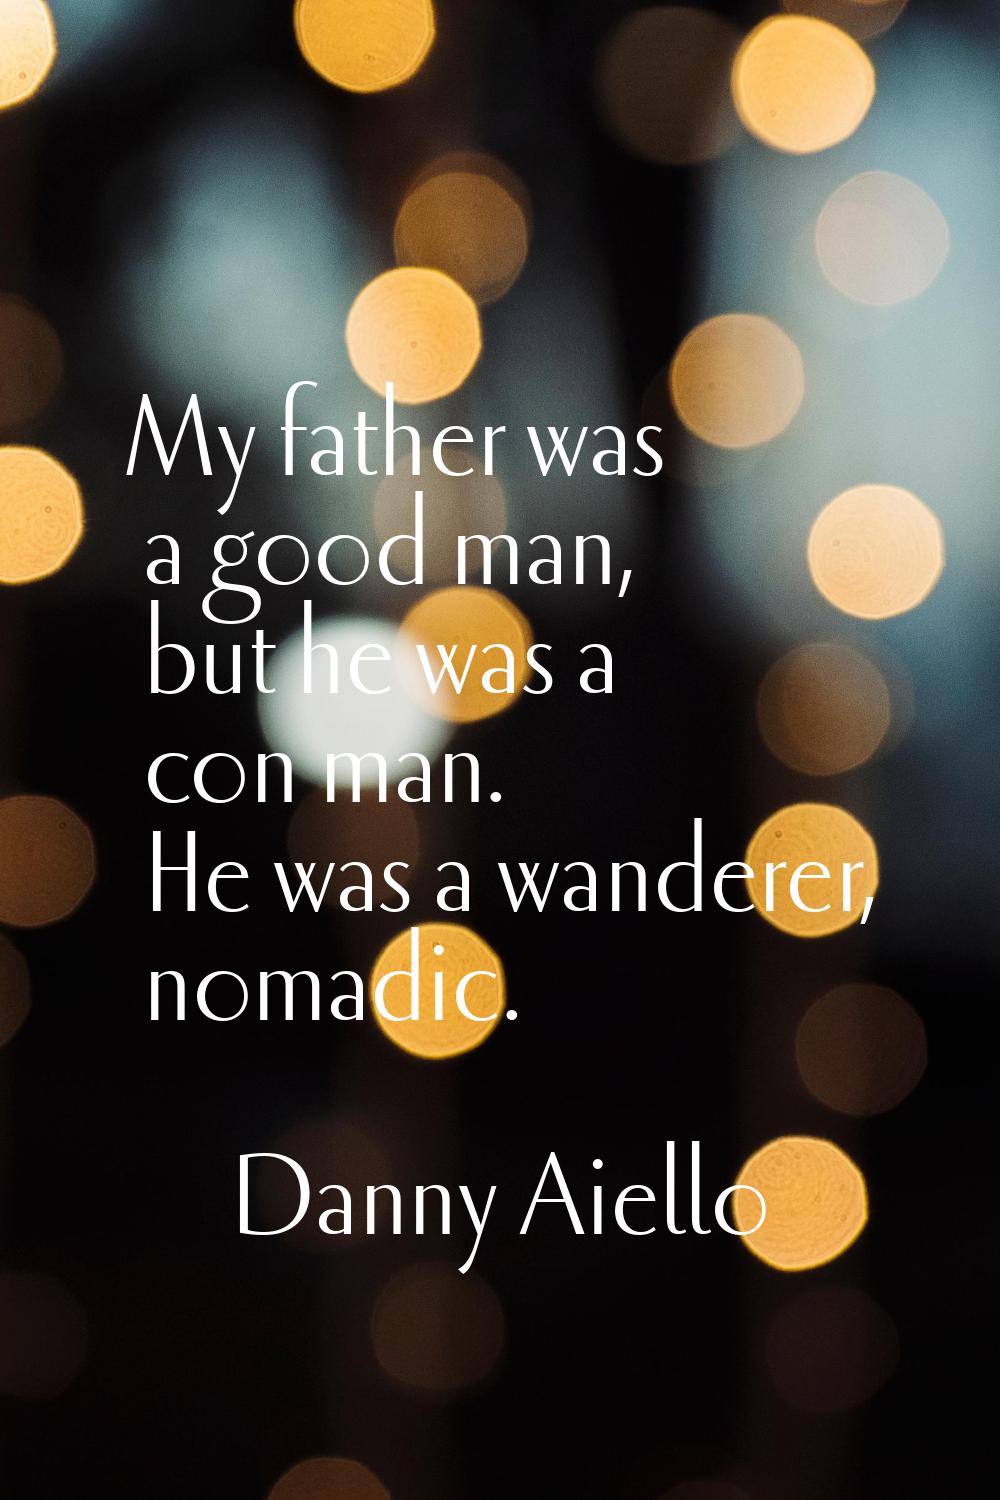 My father was a good man, but he was a con man. He was a wanderer, nomadic.